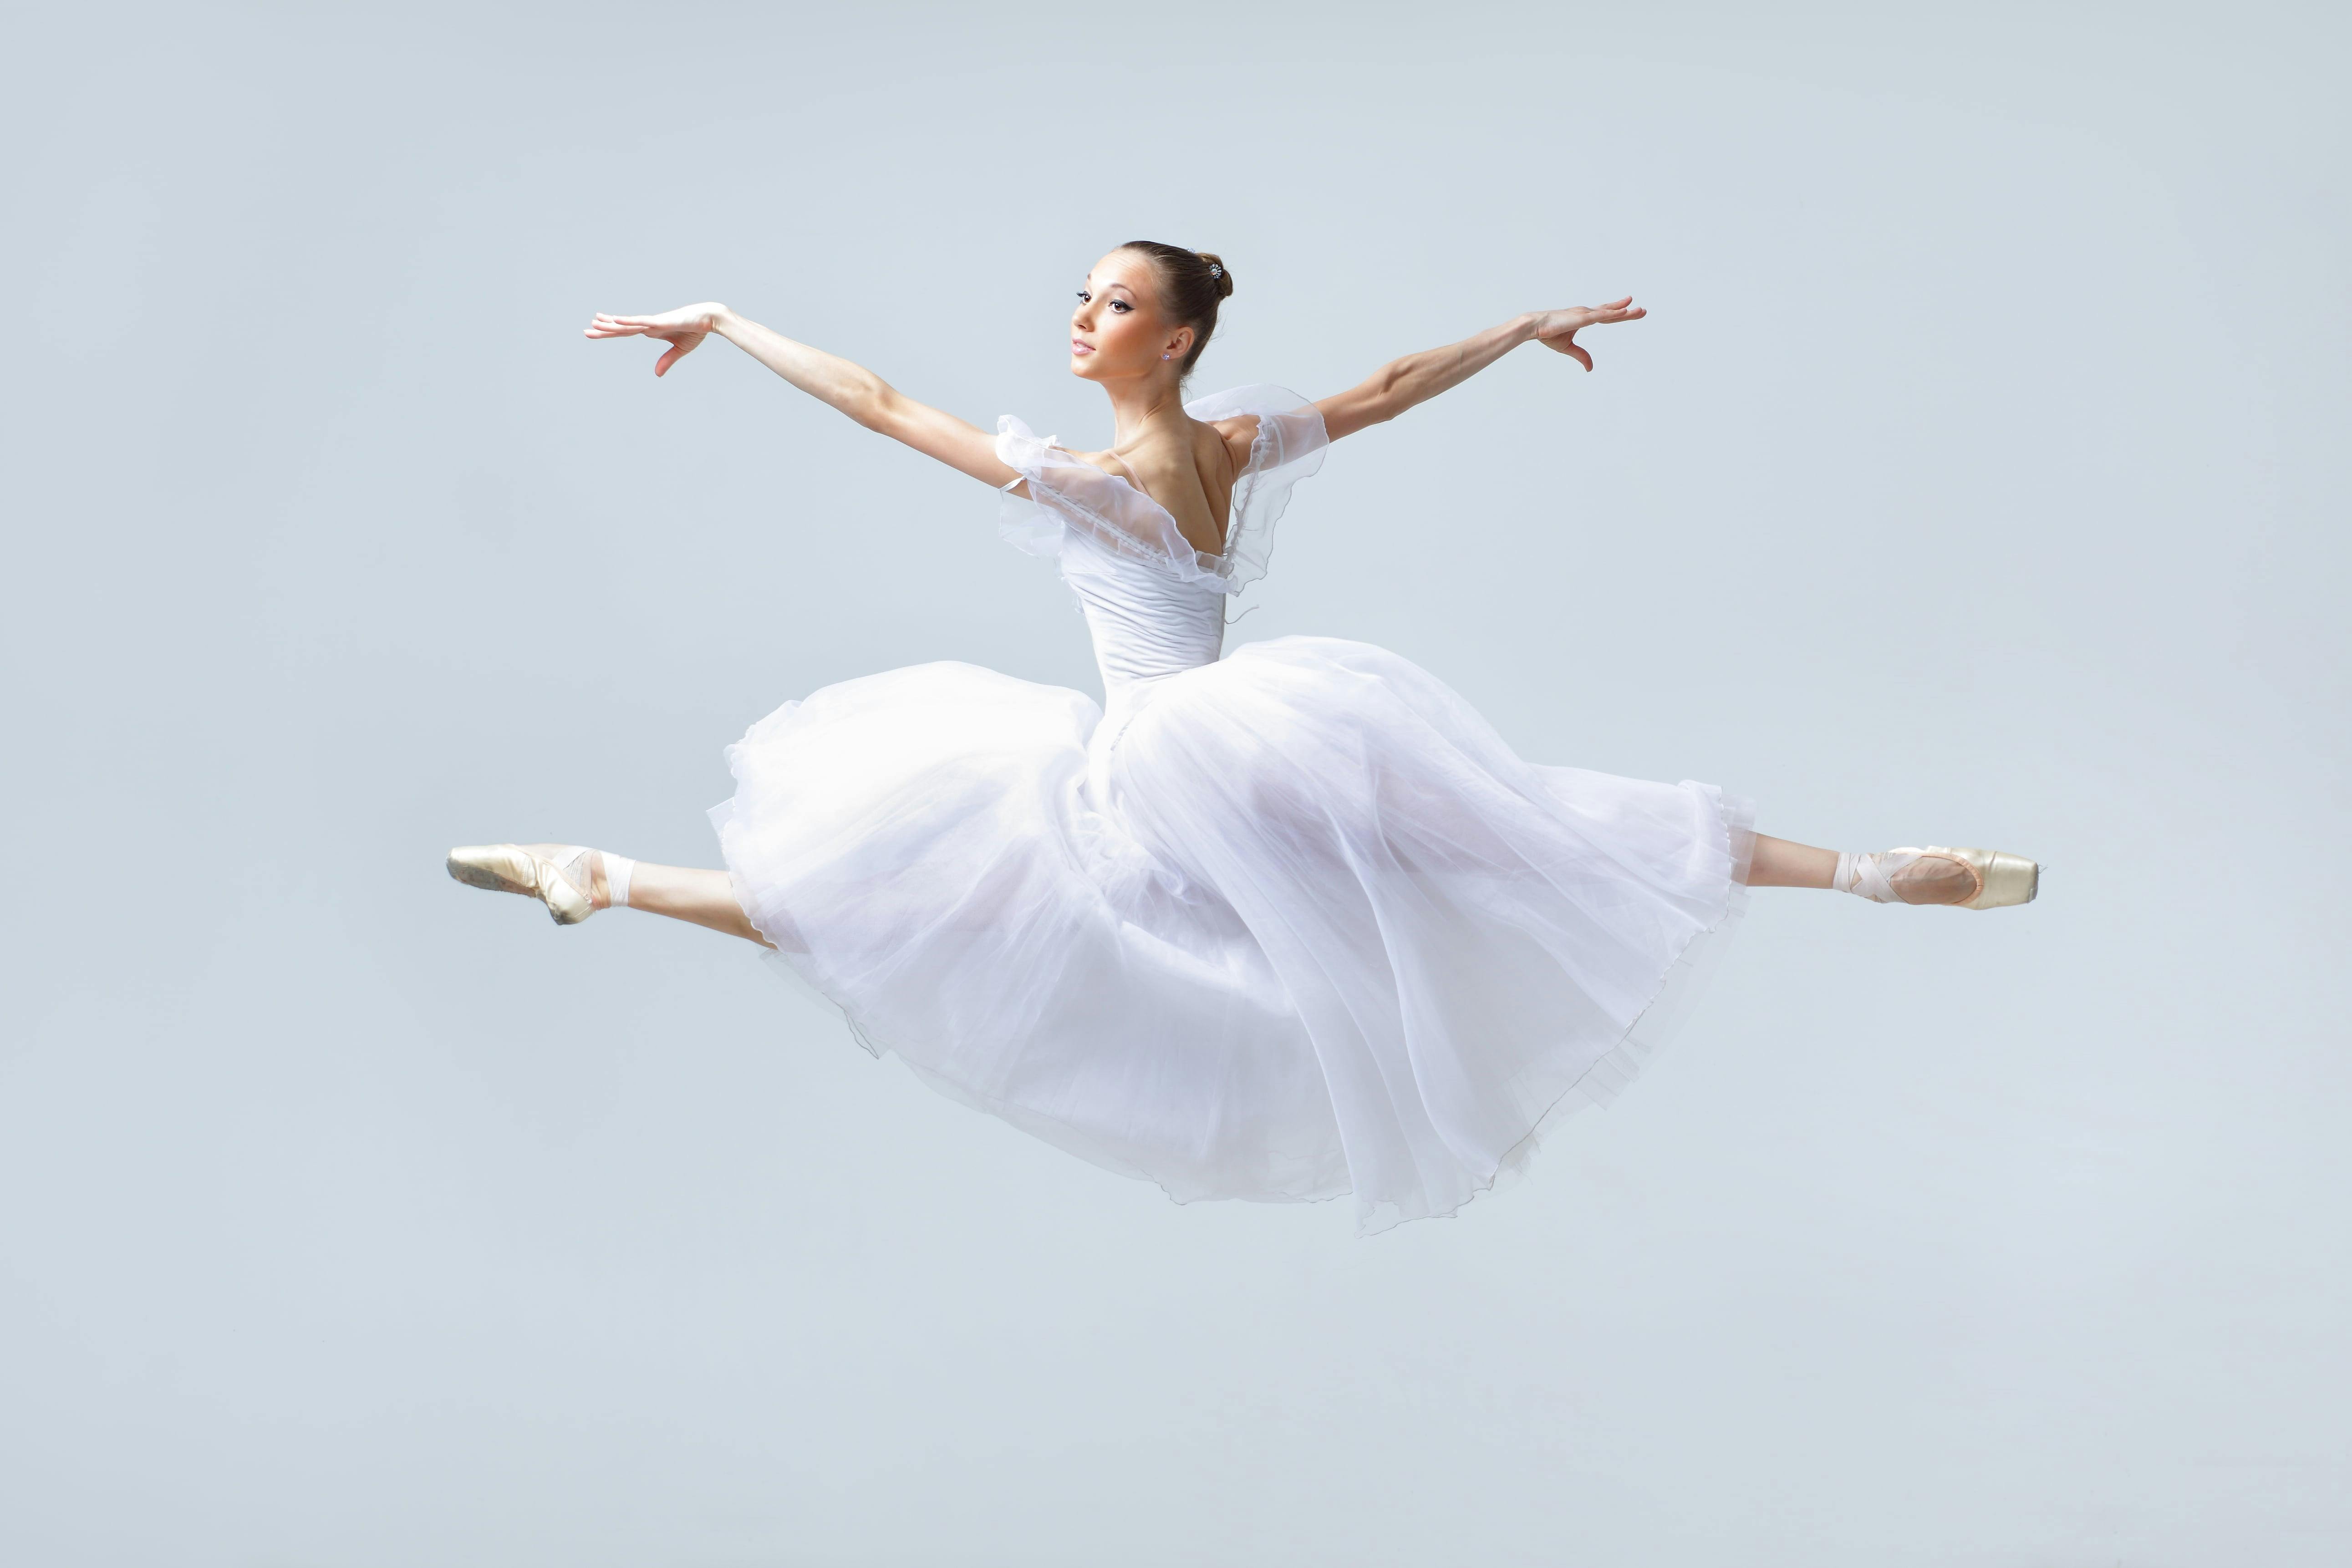 The power of awe in a ballerina